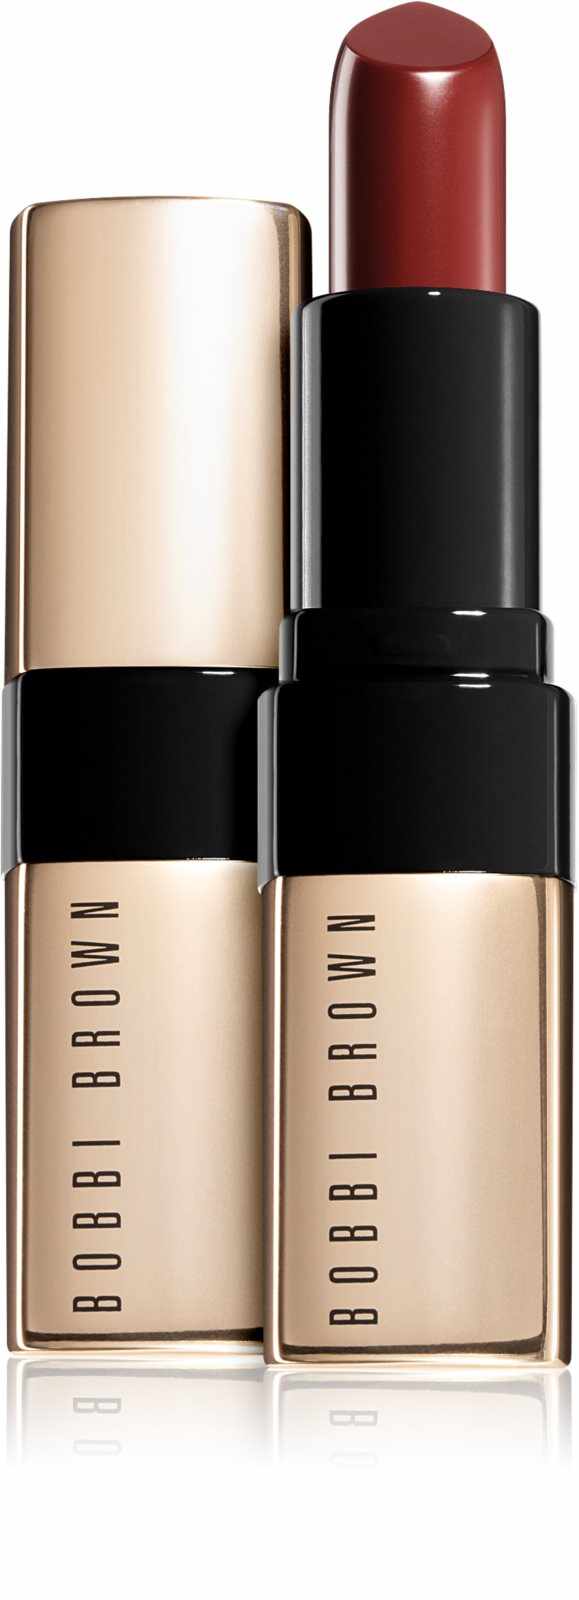 Bobbi Brown Luxe Lip Color Luxe Lip Color-New York Sunset 3,8Grr